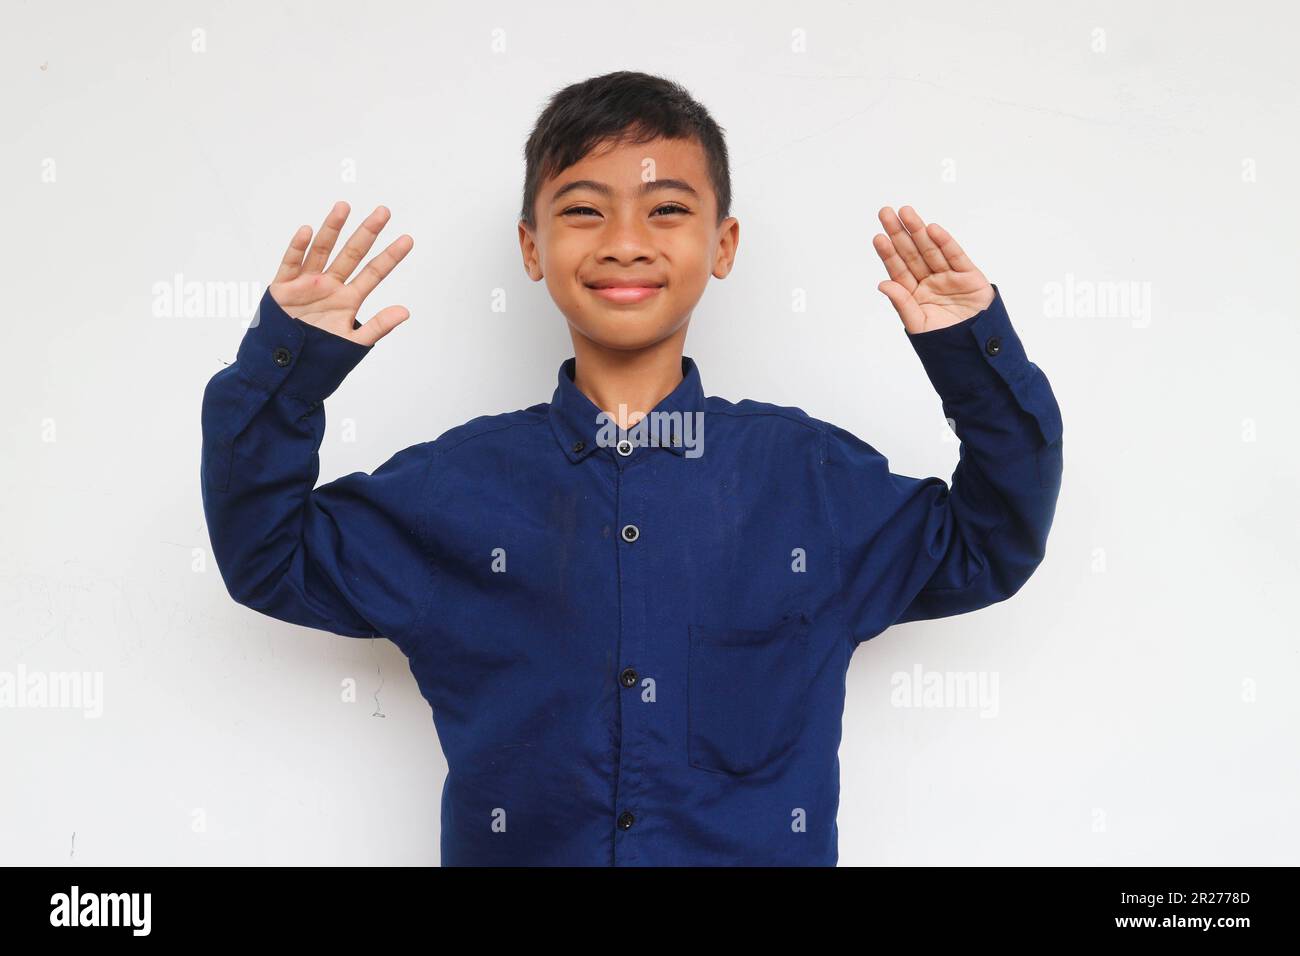 Cheerful little boy in express smiling face while raised the hands, isolated on white background. A 10 years old boy making a funny face. Stock Photo